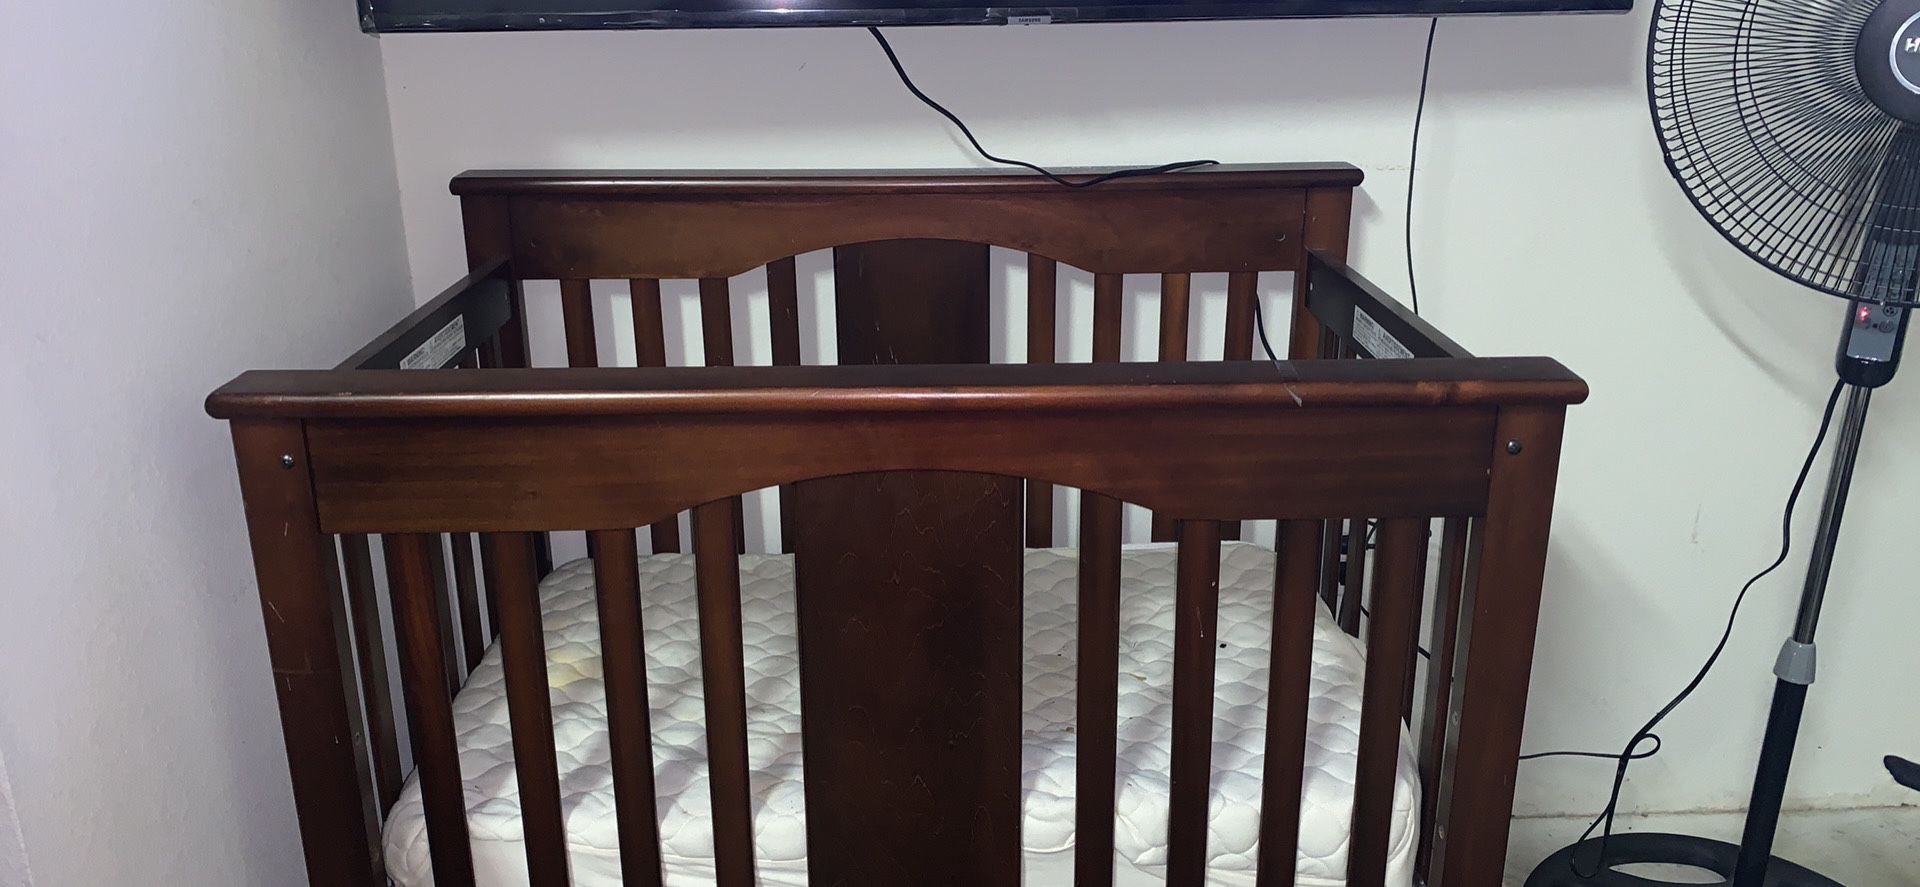 Crib / Changer combo with mattress and changing pad